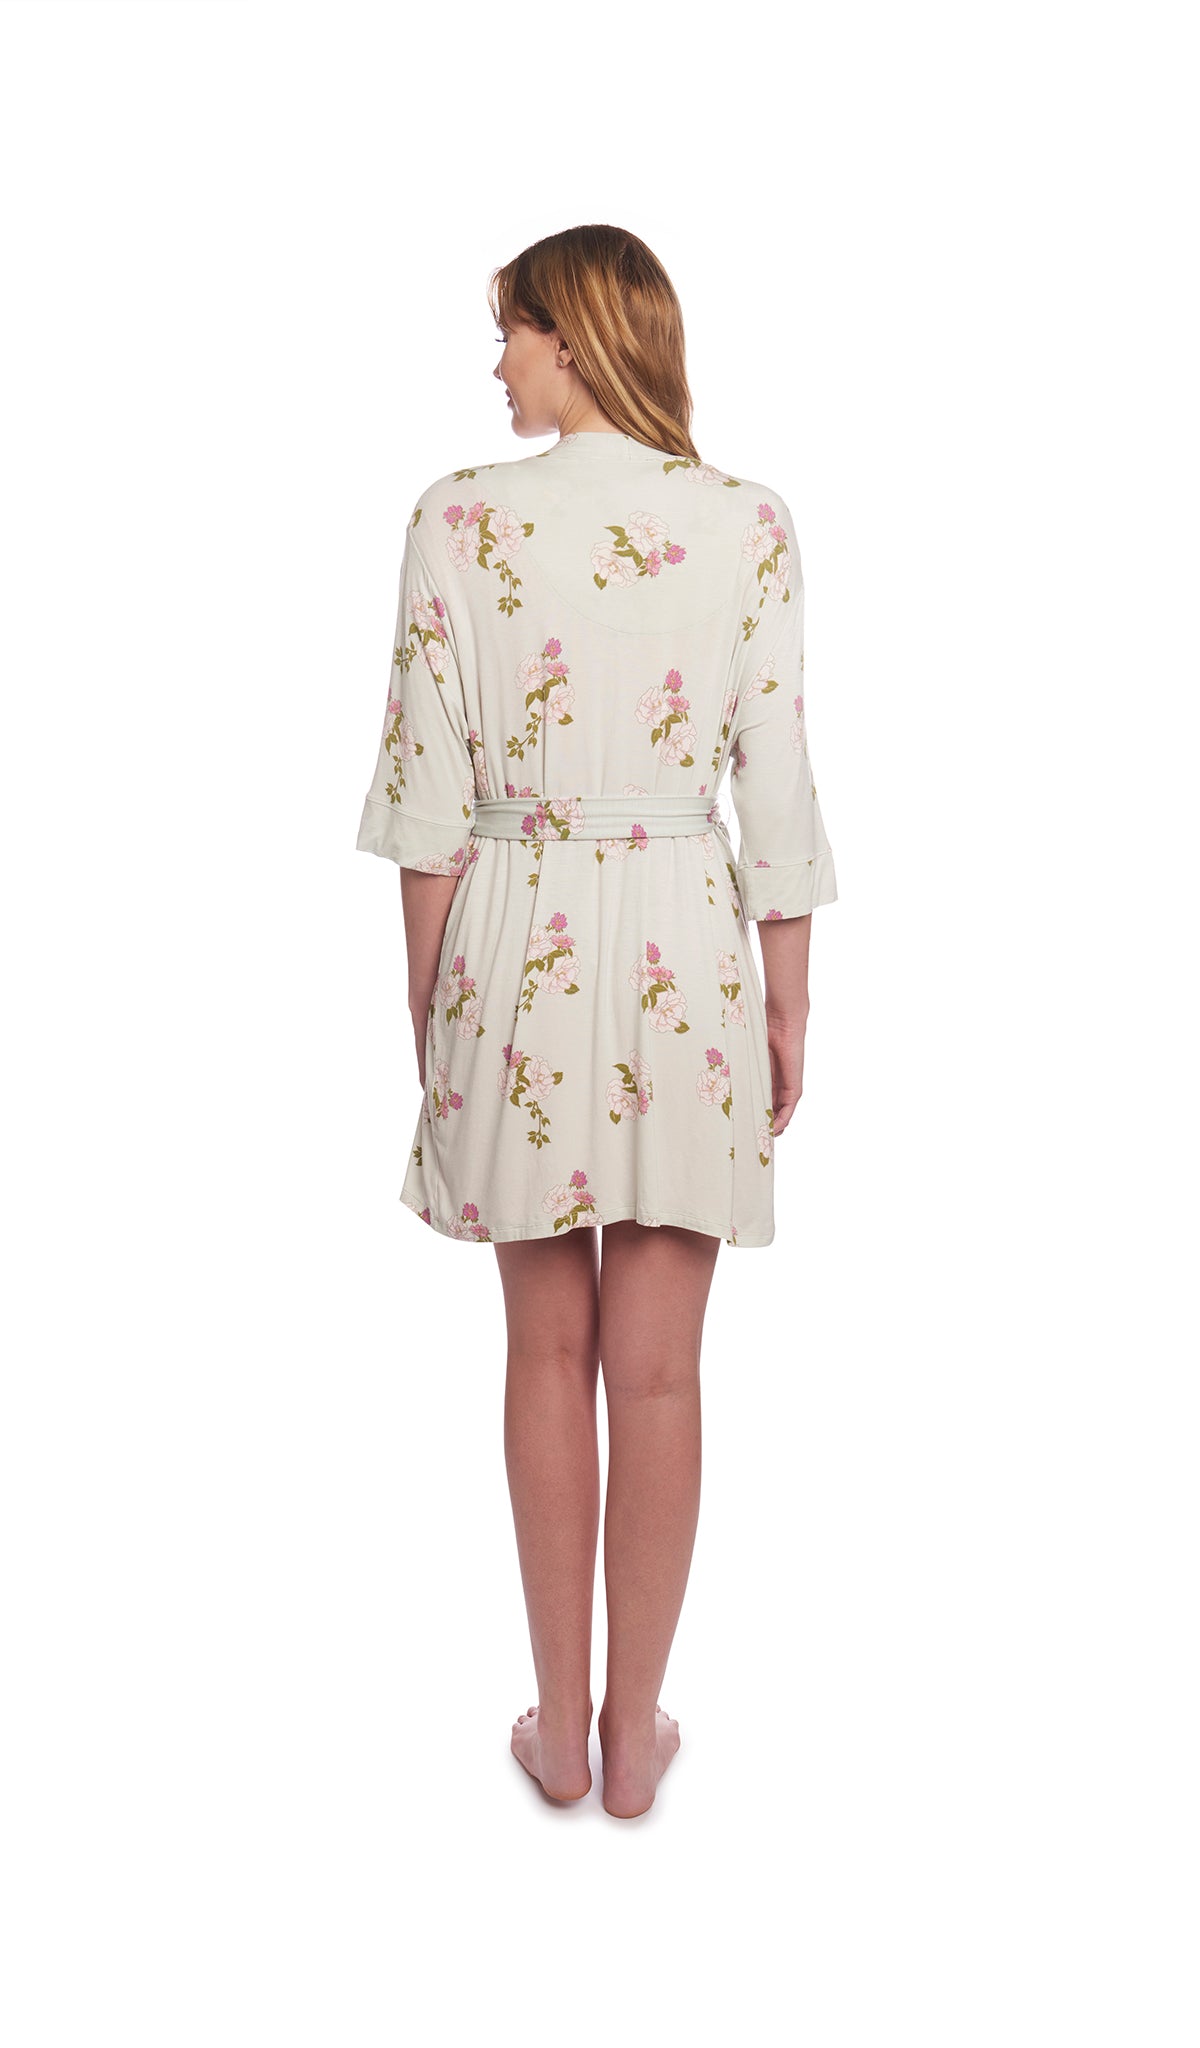 Peony Carolyn 4-Piece Set, back shot of woman wearing the floral printed robe.